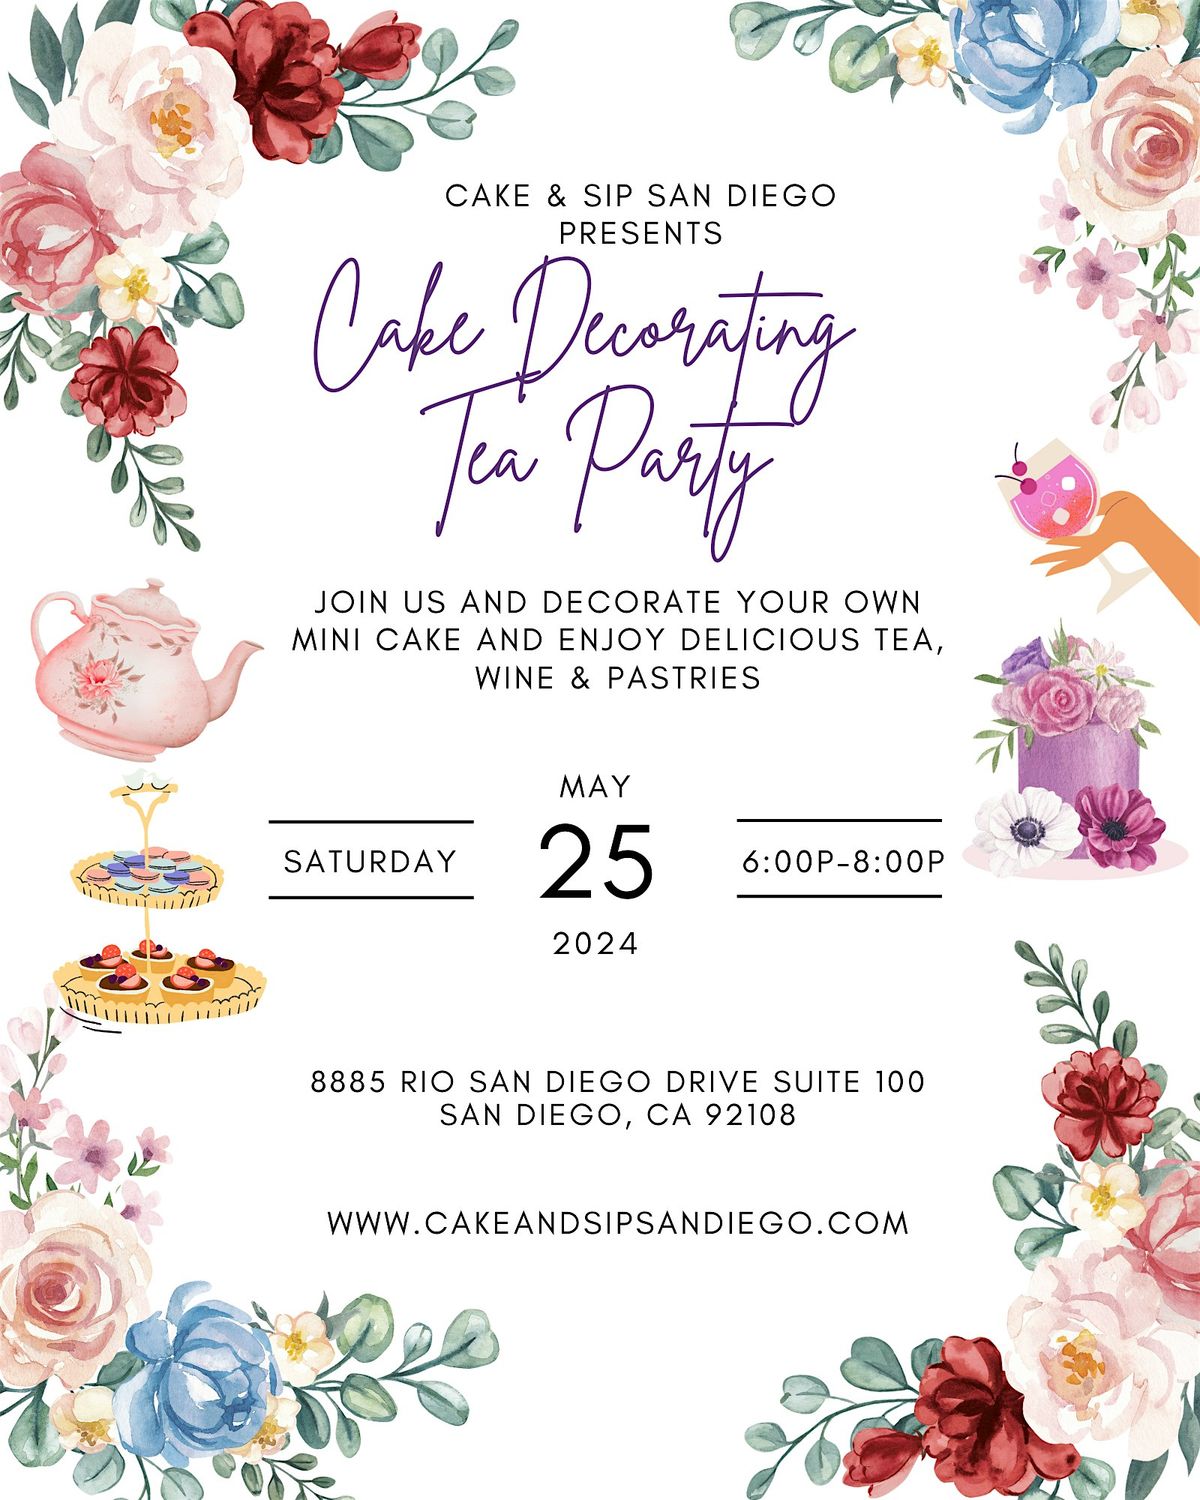 Cake and Sip San Diego "Cake Decorating & Tea Party"